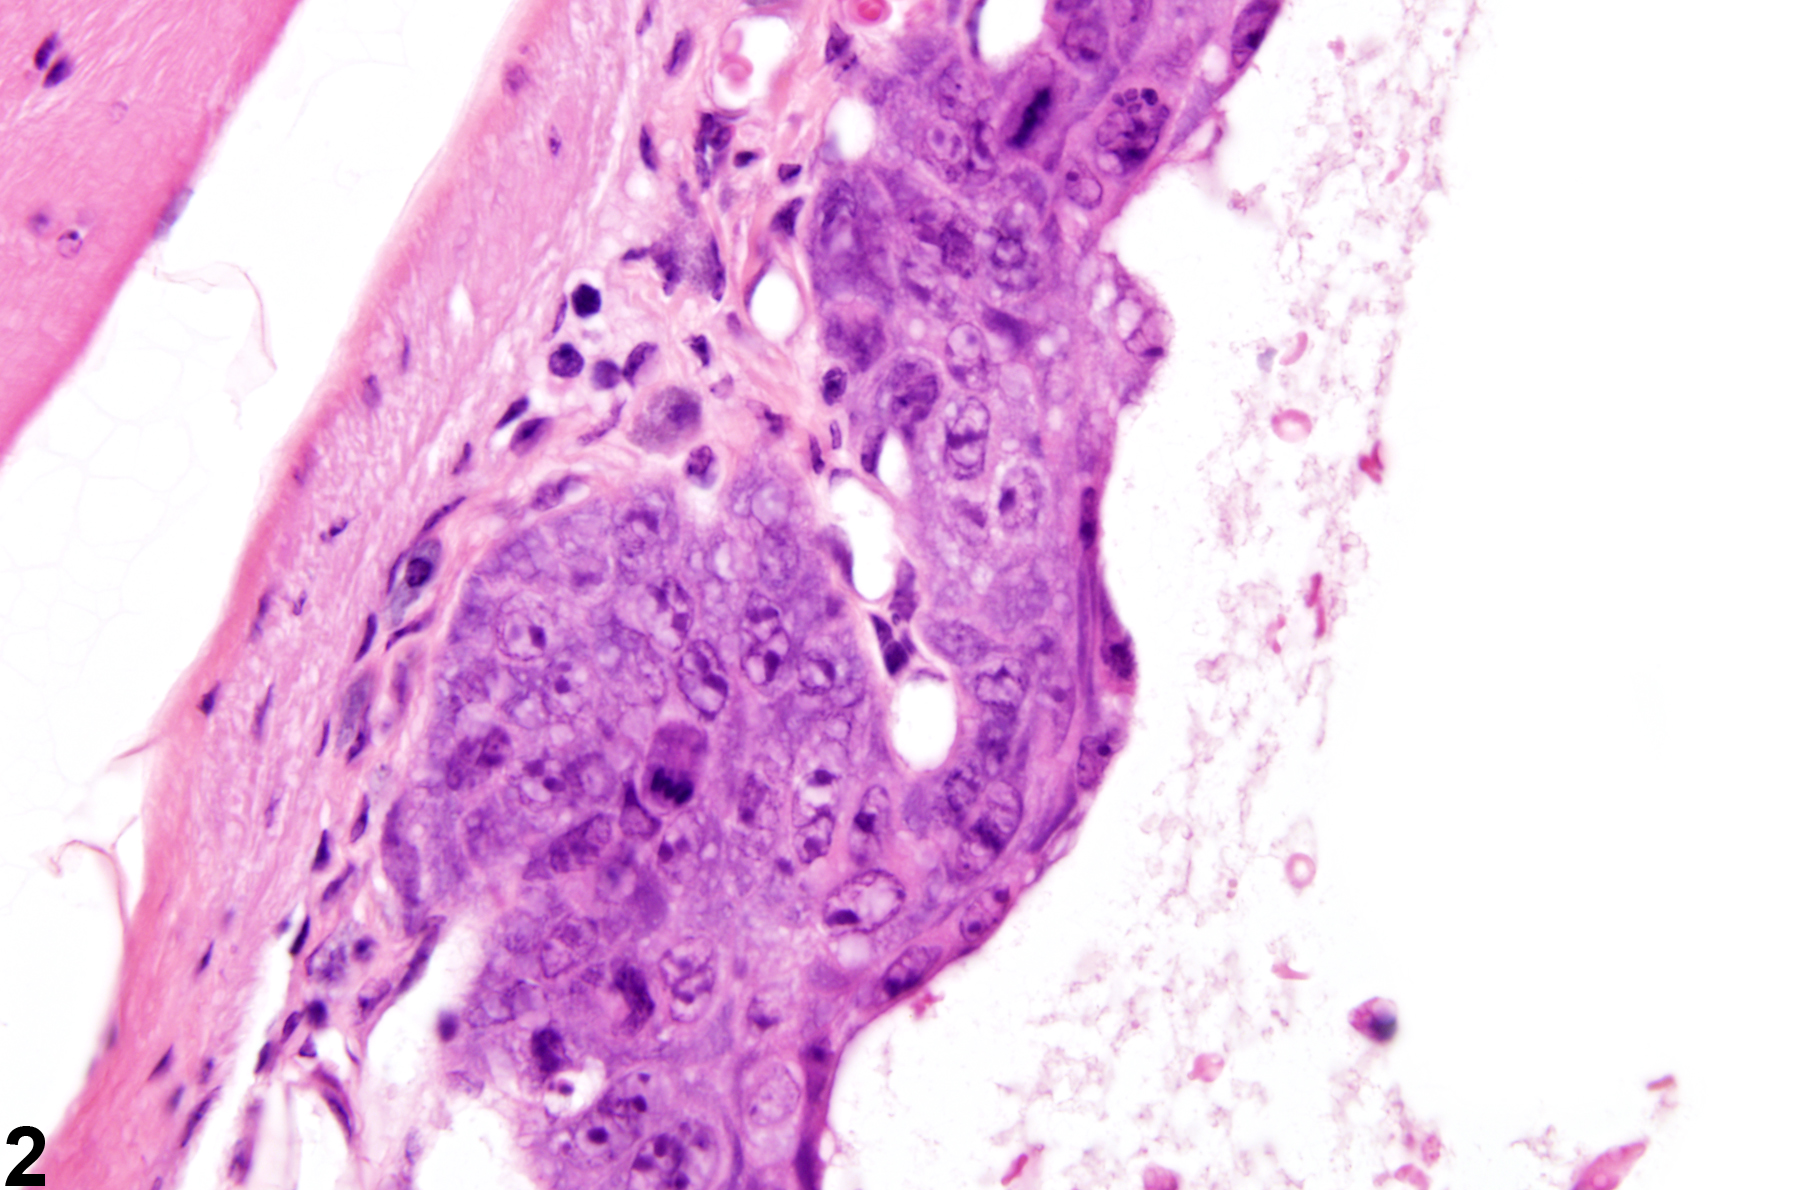 Image of hyperplasia, atypical in the nose, respiratory epithelium from a female B6C3F1/N mouse in a chronic study